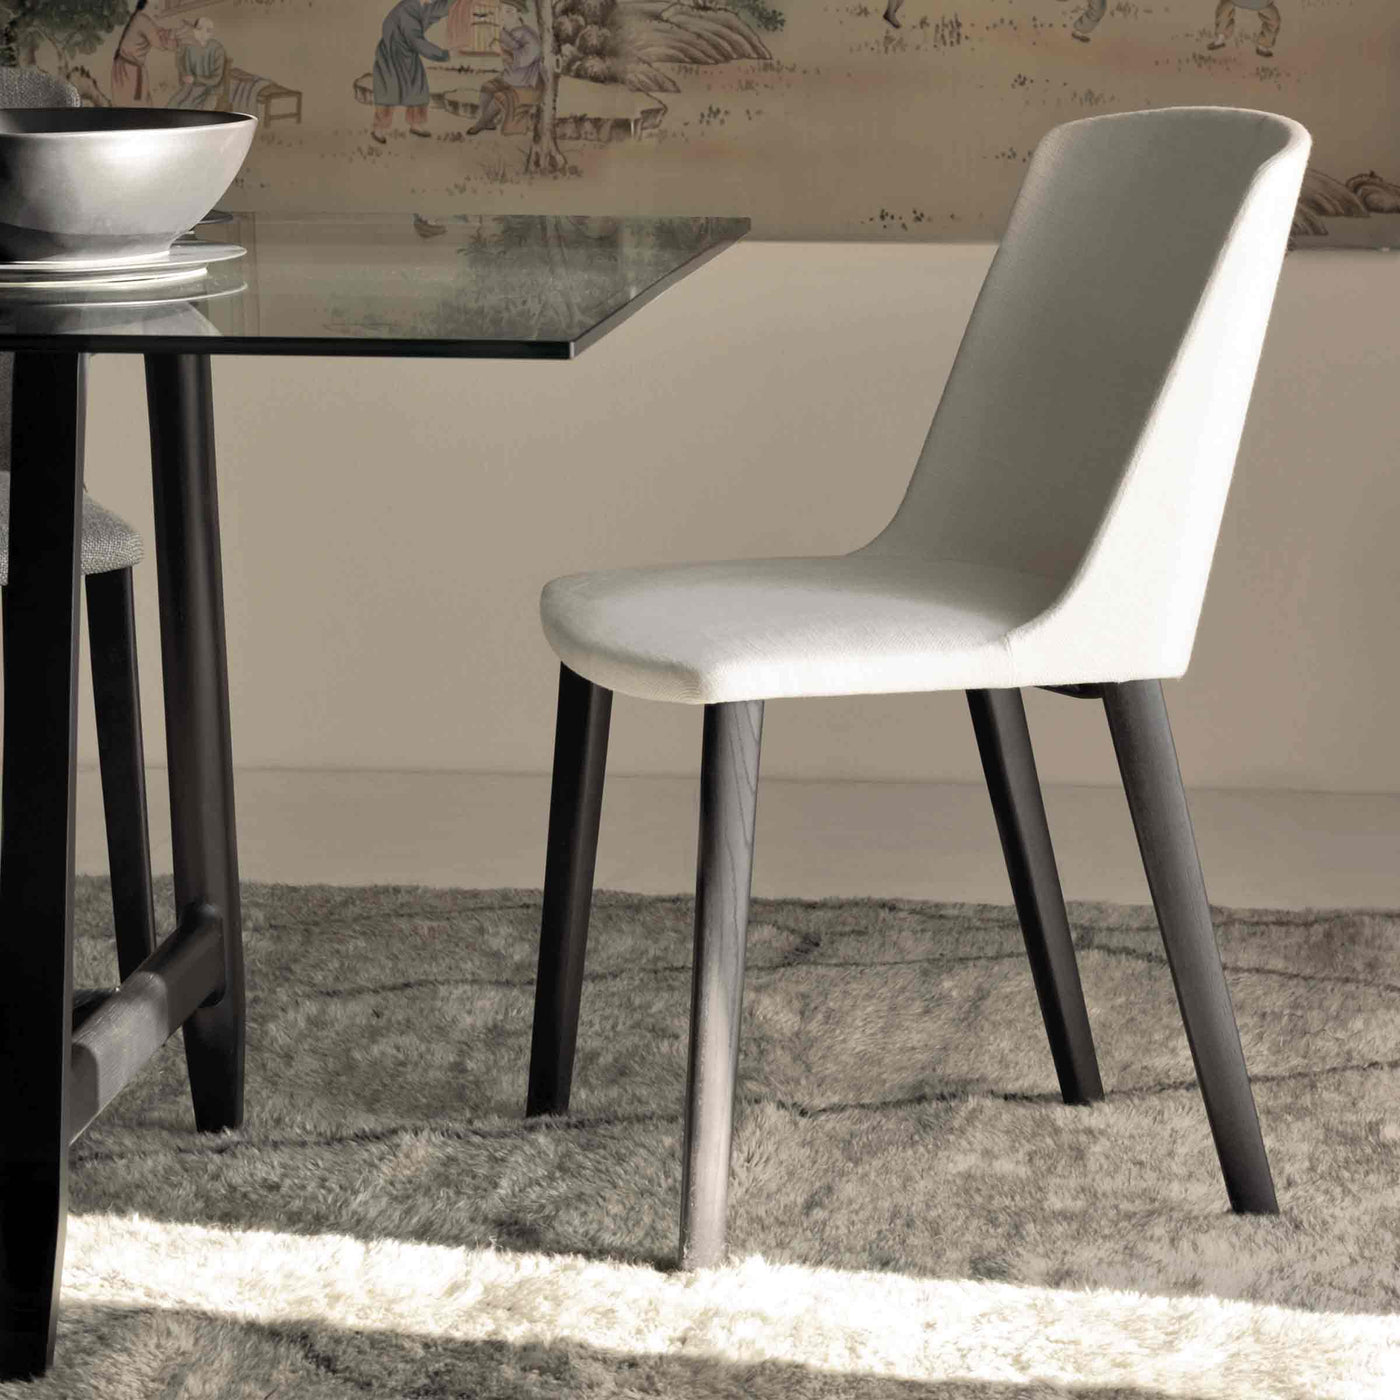 Upholstered Dining Chair LA FRANCESA by Lievore Altherr Molina for Driade 02